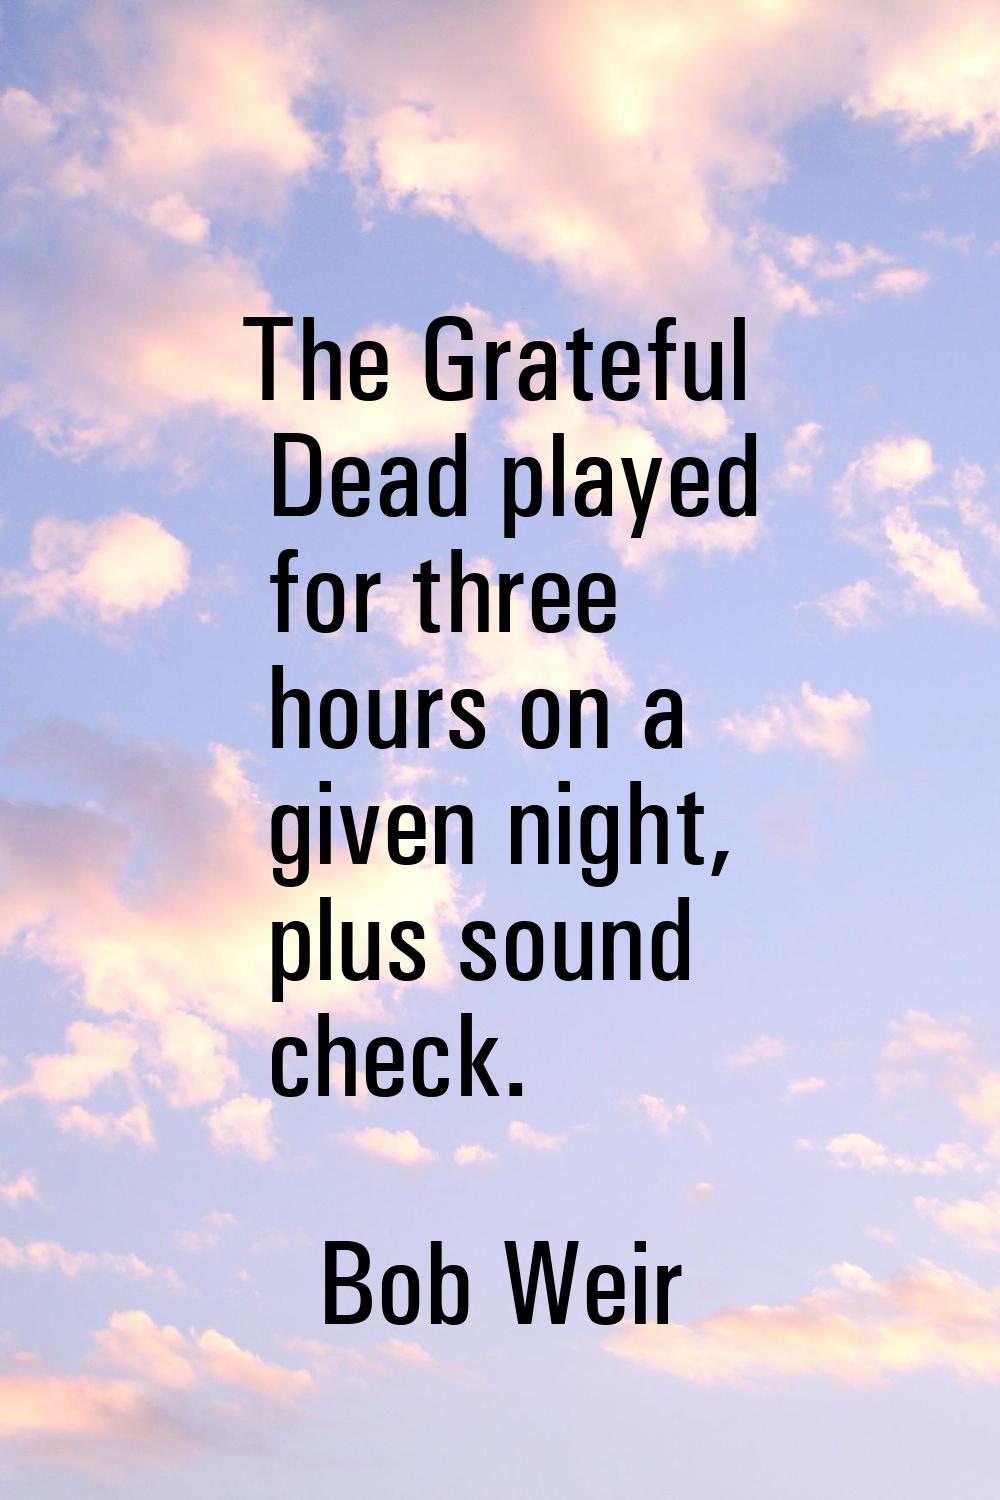 The Grateful Dead played for three hours on a given night, plus sound check.